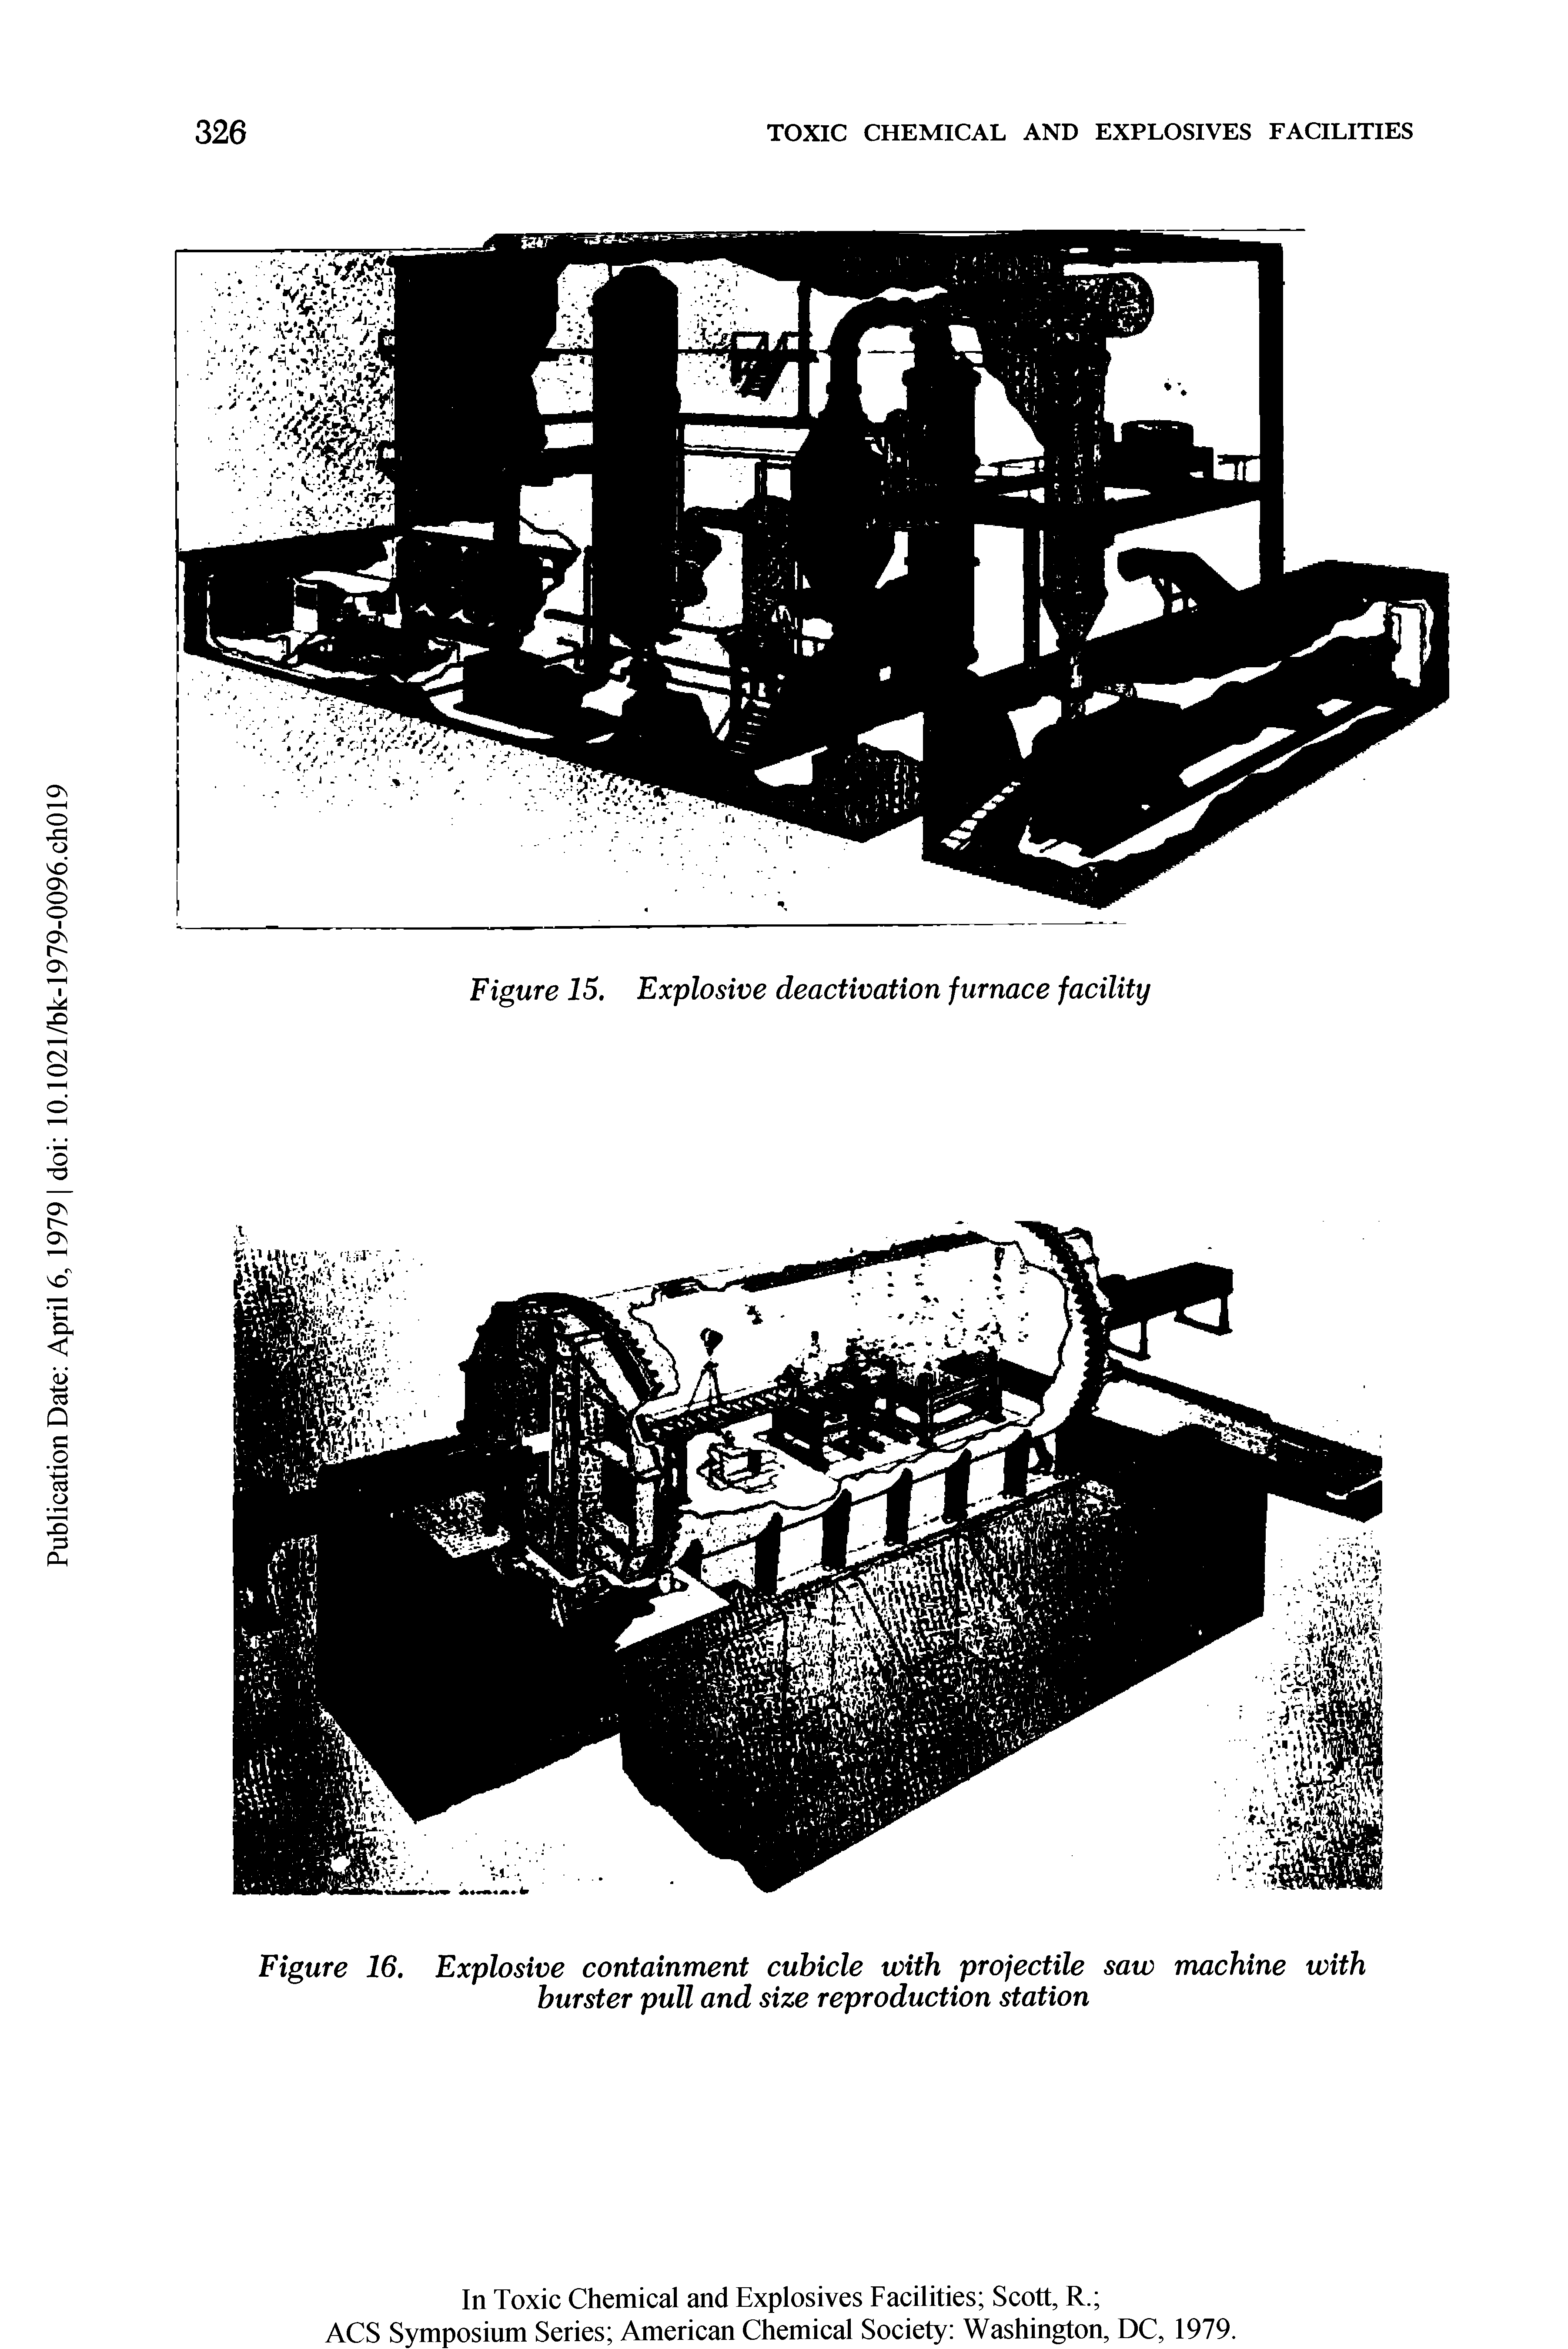 Figure 16. Explosive containment cubicle with projectile saw machine with burster pull and size reproduction station...